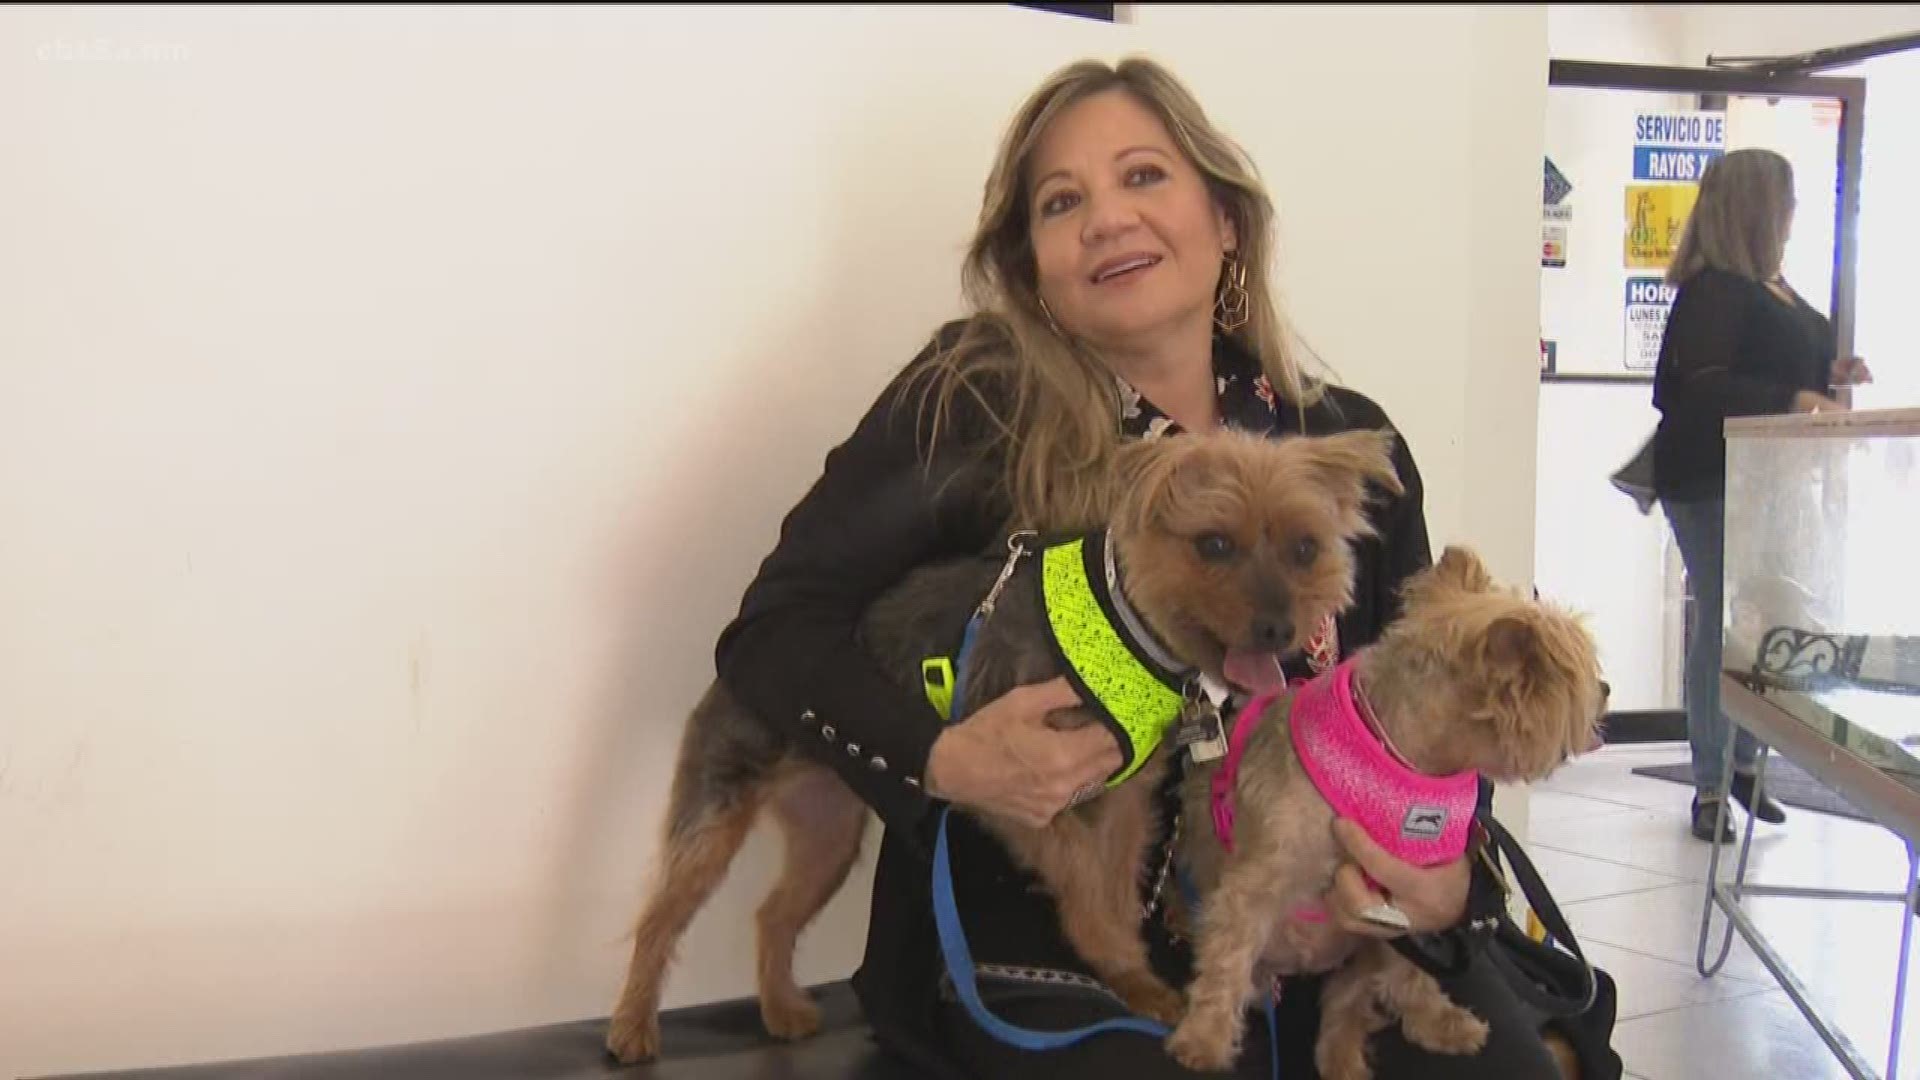 Not everything having to do with the Mexican border is political in nature. News 8’s John Howard took a trip beyond the border to see how San Diego County residents are crossing into Mexico to save money on veterinarian care.